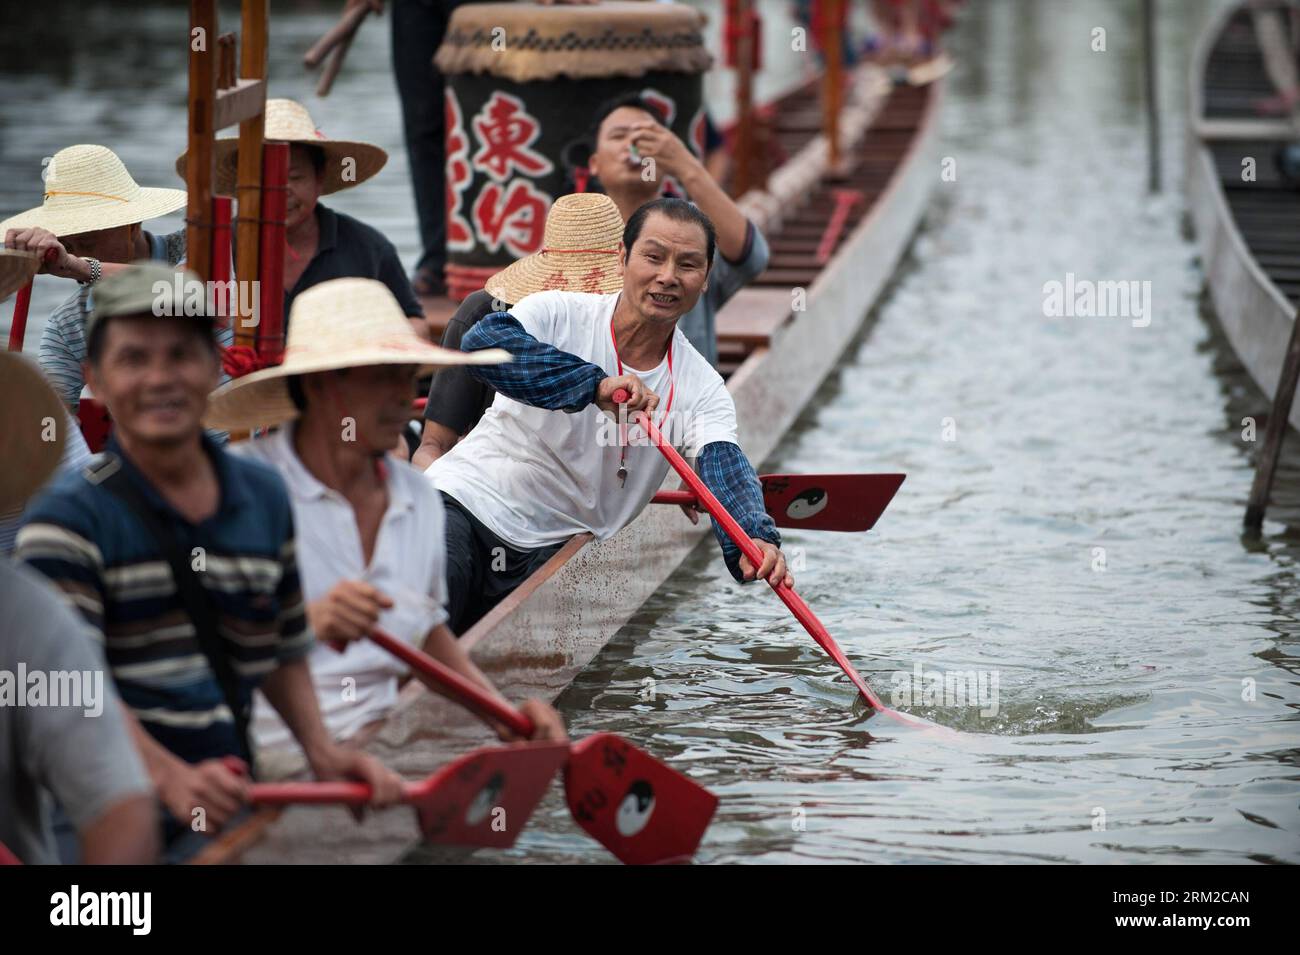 Bildnummer: 59784320  Datum: 06.06.2013  Copyright: imago/Xinhua (130606)-- GUANGZHOU, June 6, 2013 (Xinhua) -- Villagers have a trial run of their new dragon boat during a launching ceremony at the Chenhanhui Shipyard at Shangjiao Village in Guangzhou, capital of south China s Guangdong Province, June 6, 2013. Chenhanhui Shipyard has been busy making new dragon boats and renovating old ones for the upcoming Dragon Boat Festival that falls on June 12 this year. in many parts of China have the tradition to hold dragon boat races during the festival. (Xinhua/Mao Siqian) CHINA-GUANGZHOU-NEW DRAGO Stock Photo